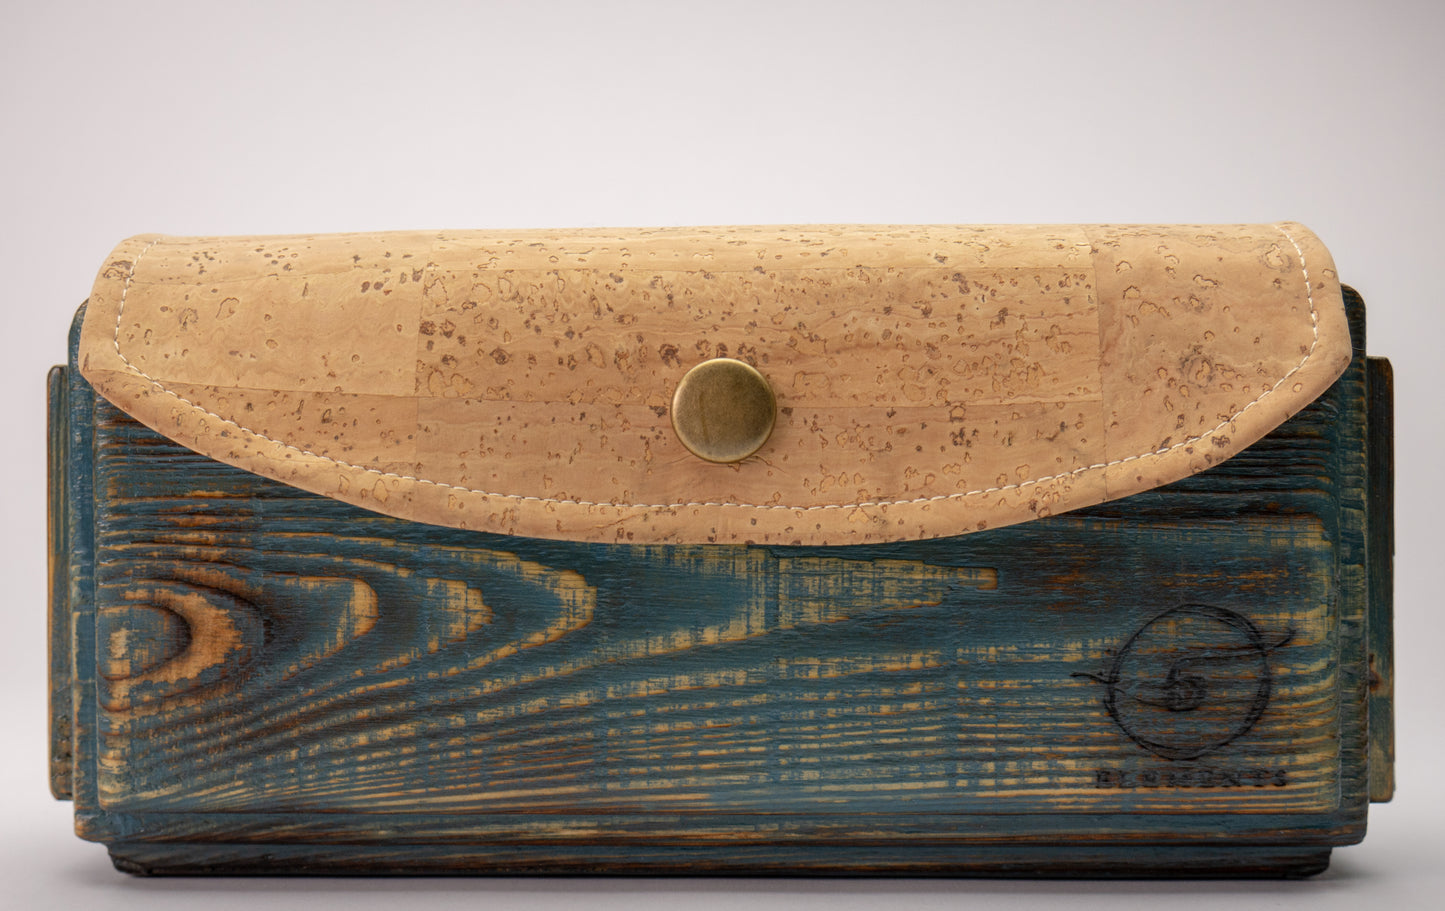 Wooden handmade purse in blue tone with natural cork leather.